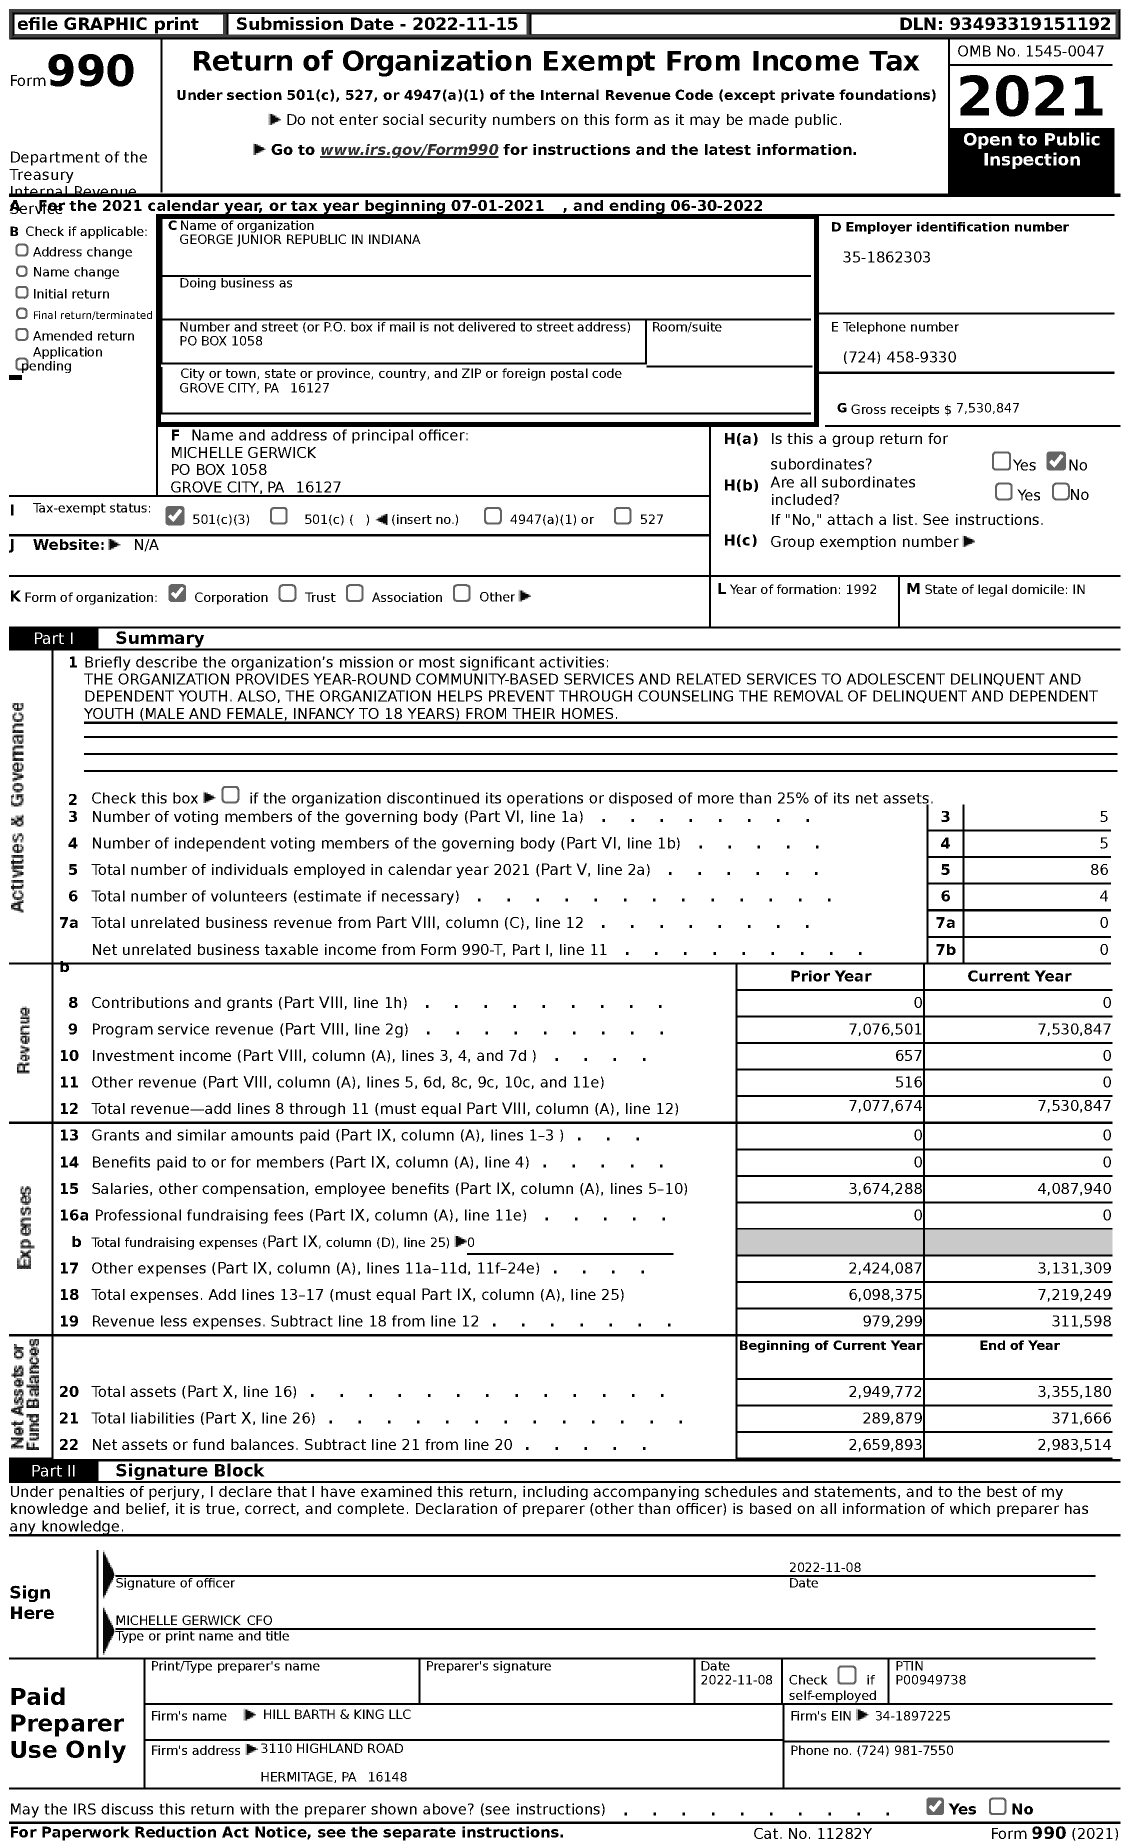 Image of first page of 2021 Form 990 for George Junior Republic in Indiana (GJR)